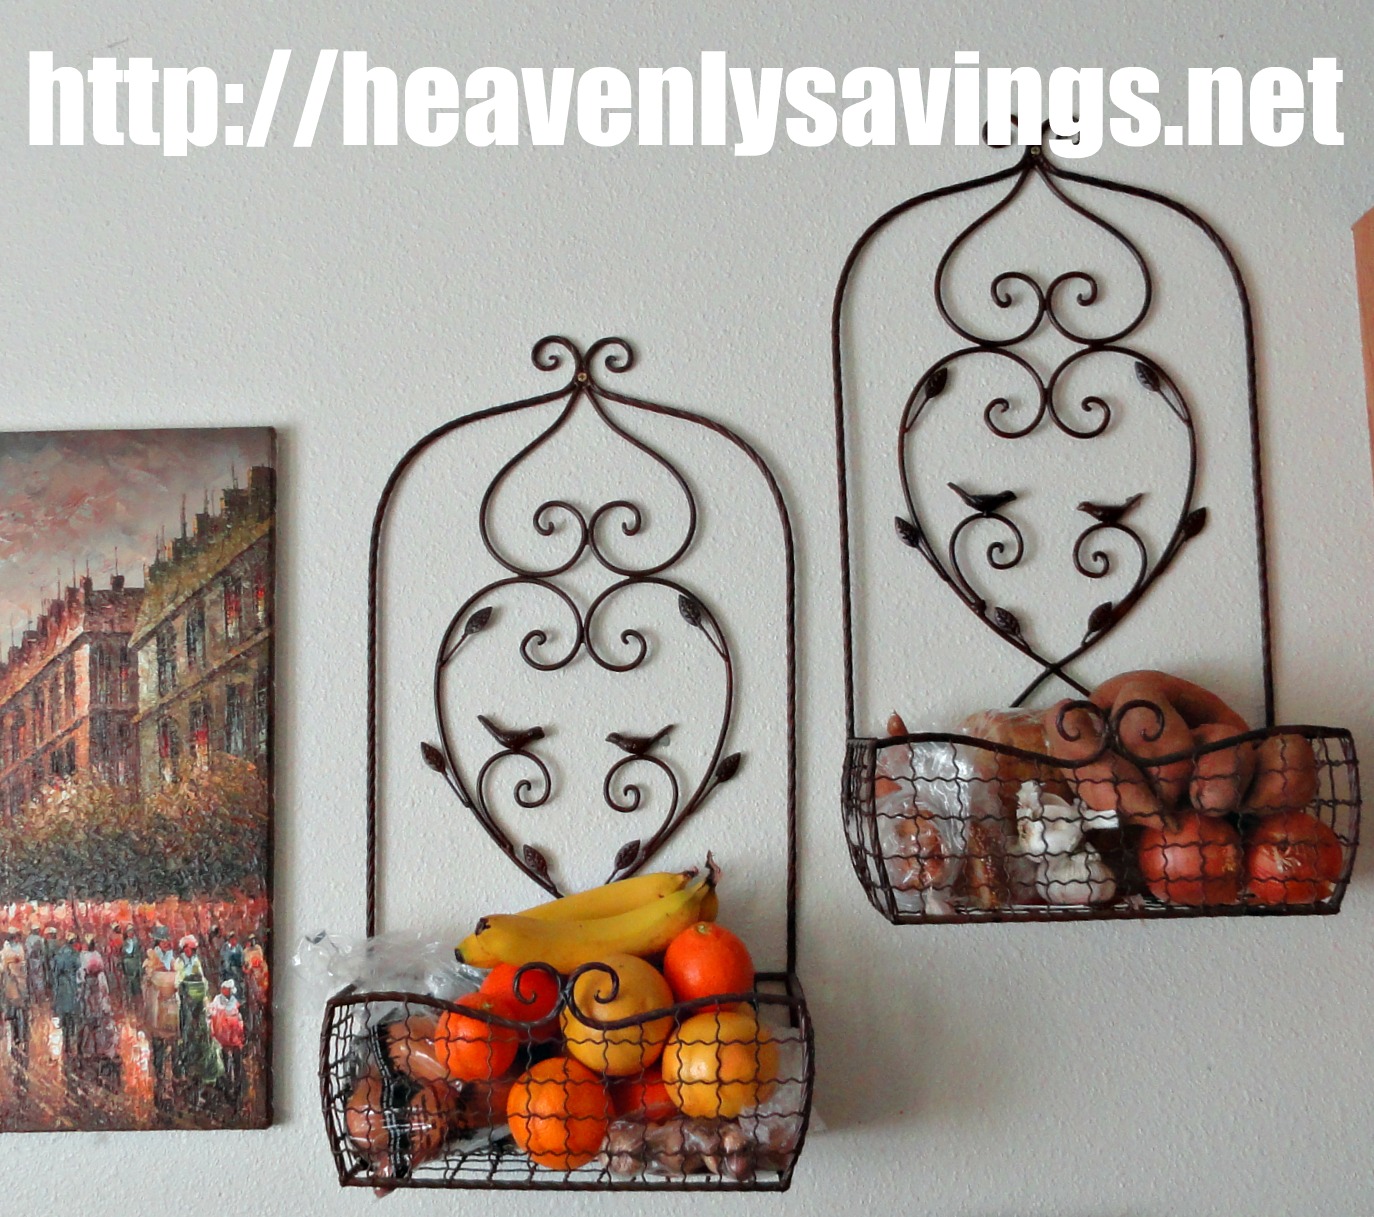 Add more Space and Organization to your Kitchen with Decorative Wall Baskets!